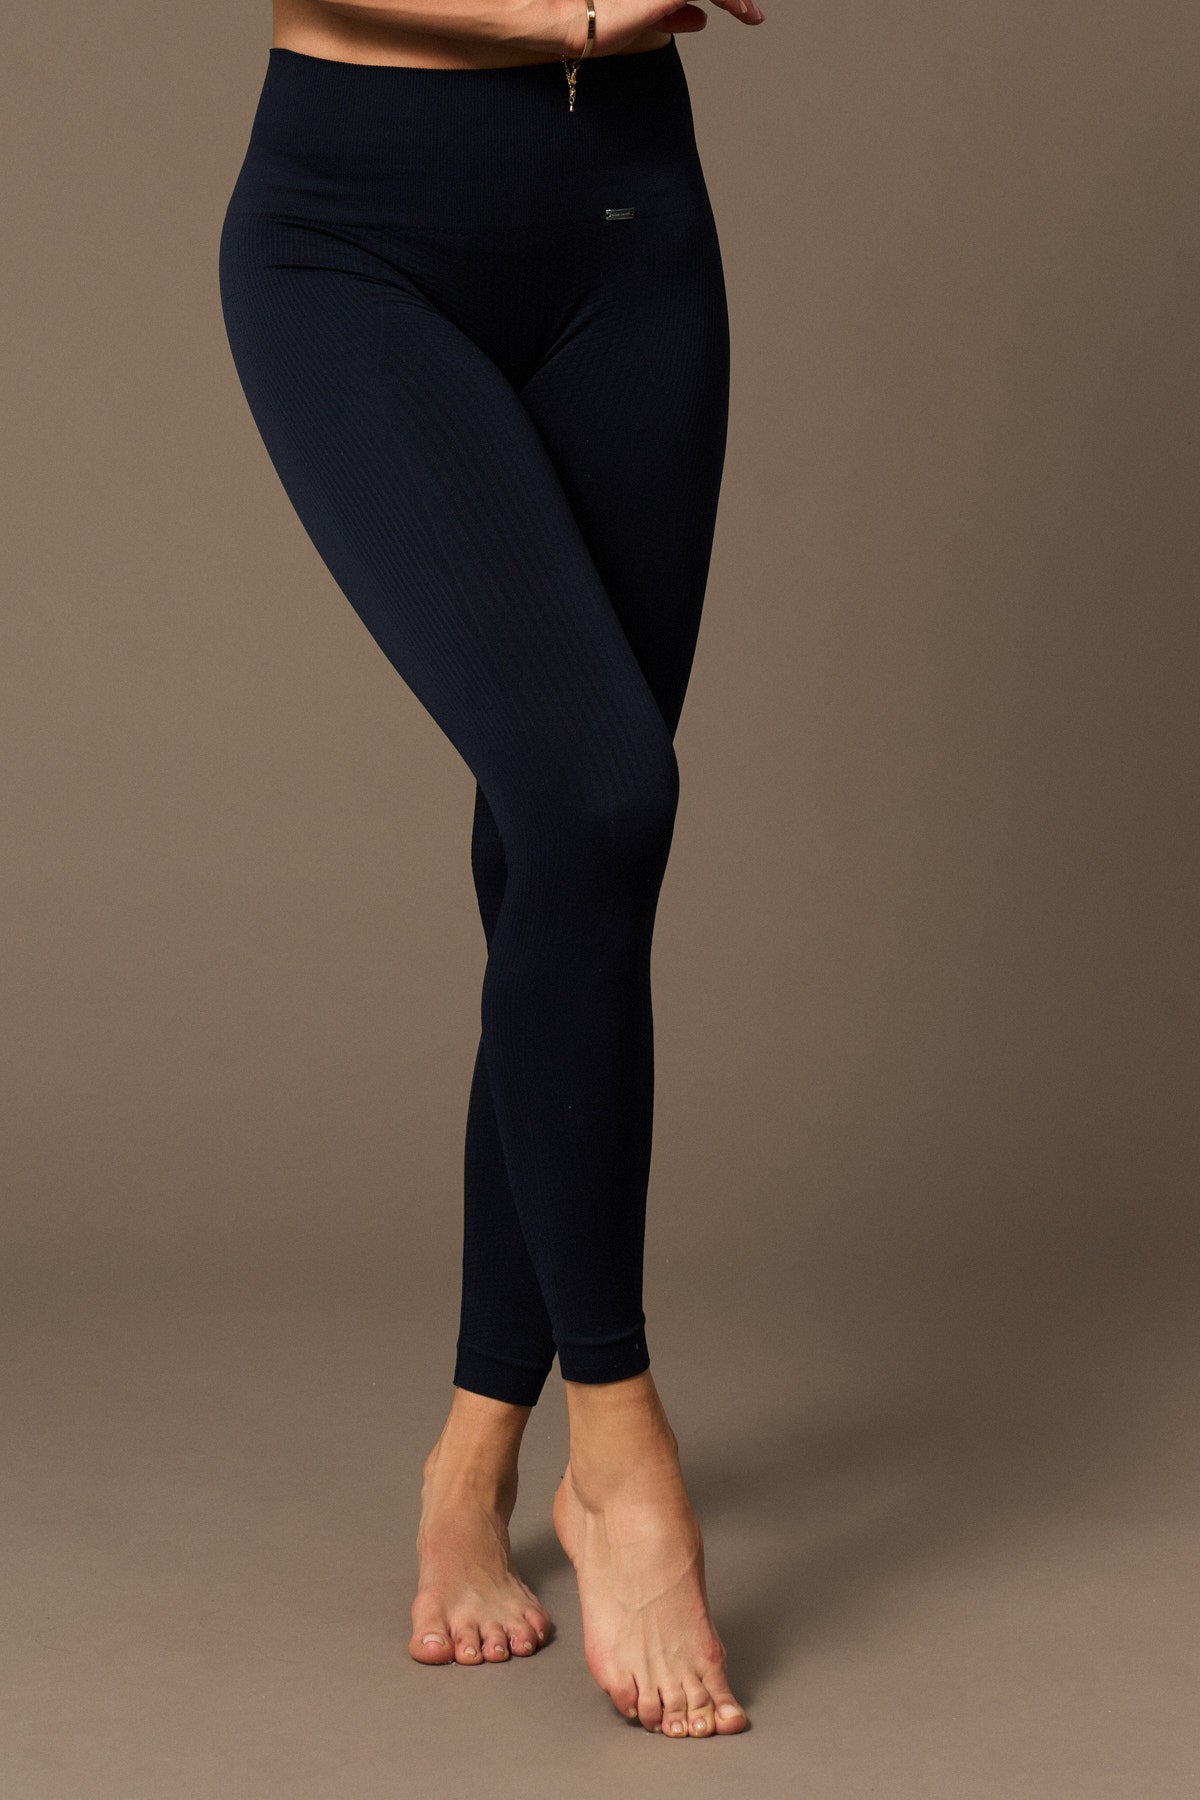 Flow Legging in Black-Long Leggings-Store Clothing Sustainable Recycled Yoga Leggings Women On-line Barcelona Believe Athletics Sustainable Recycled Yoga Clothes